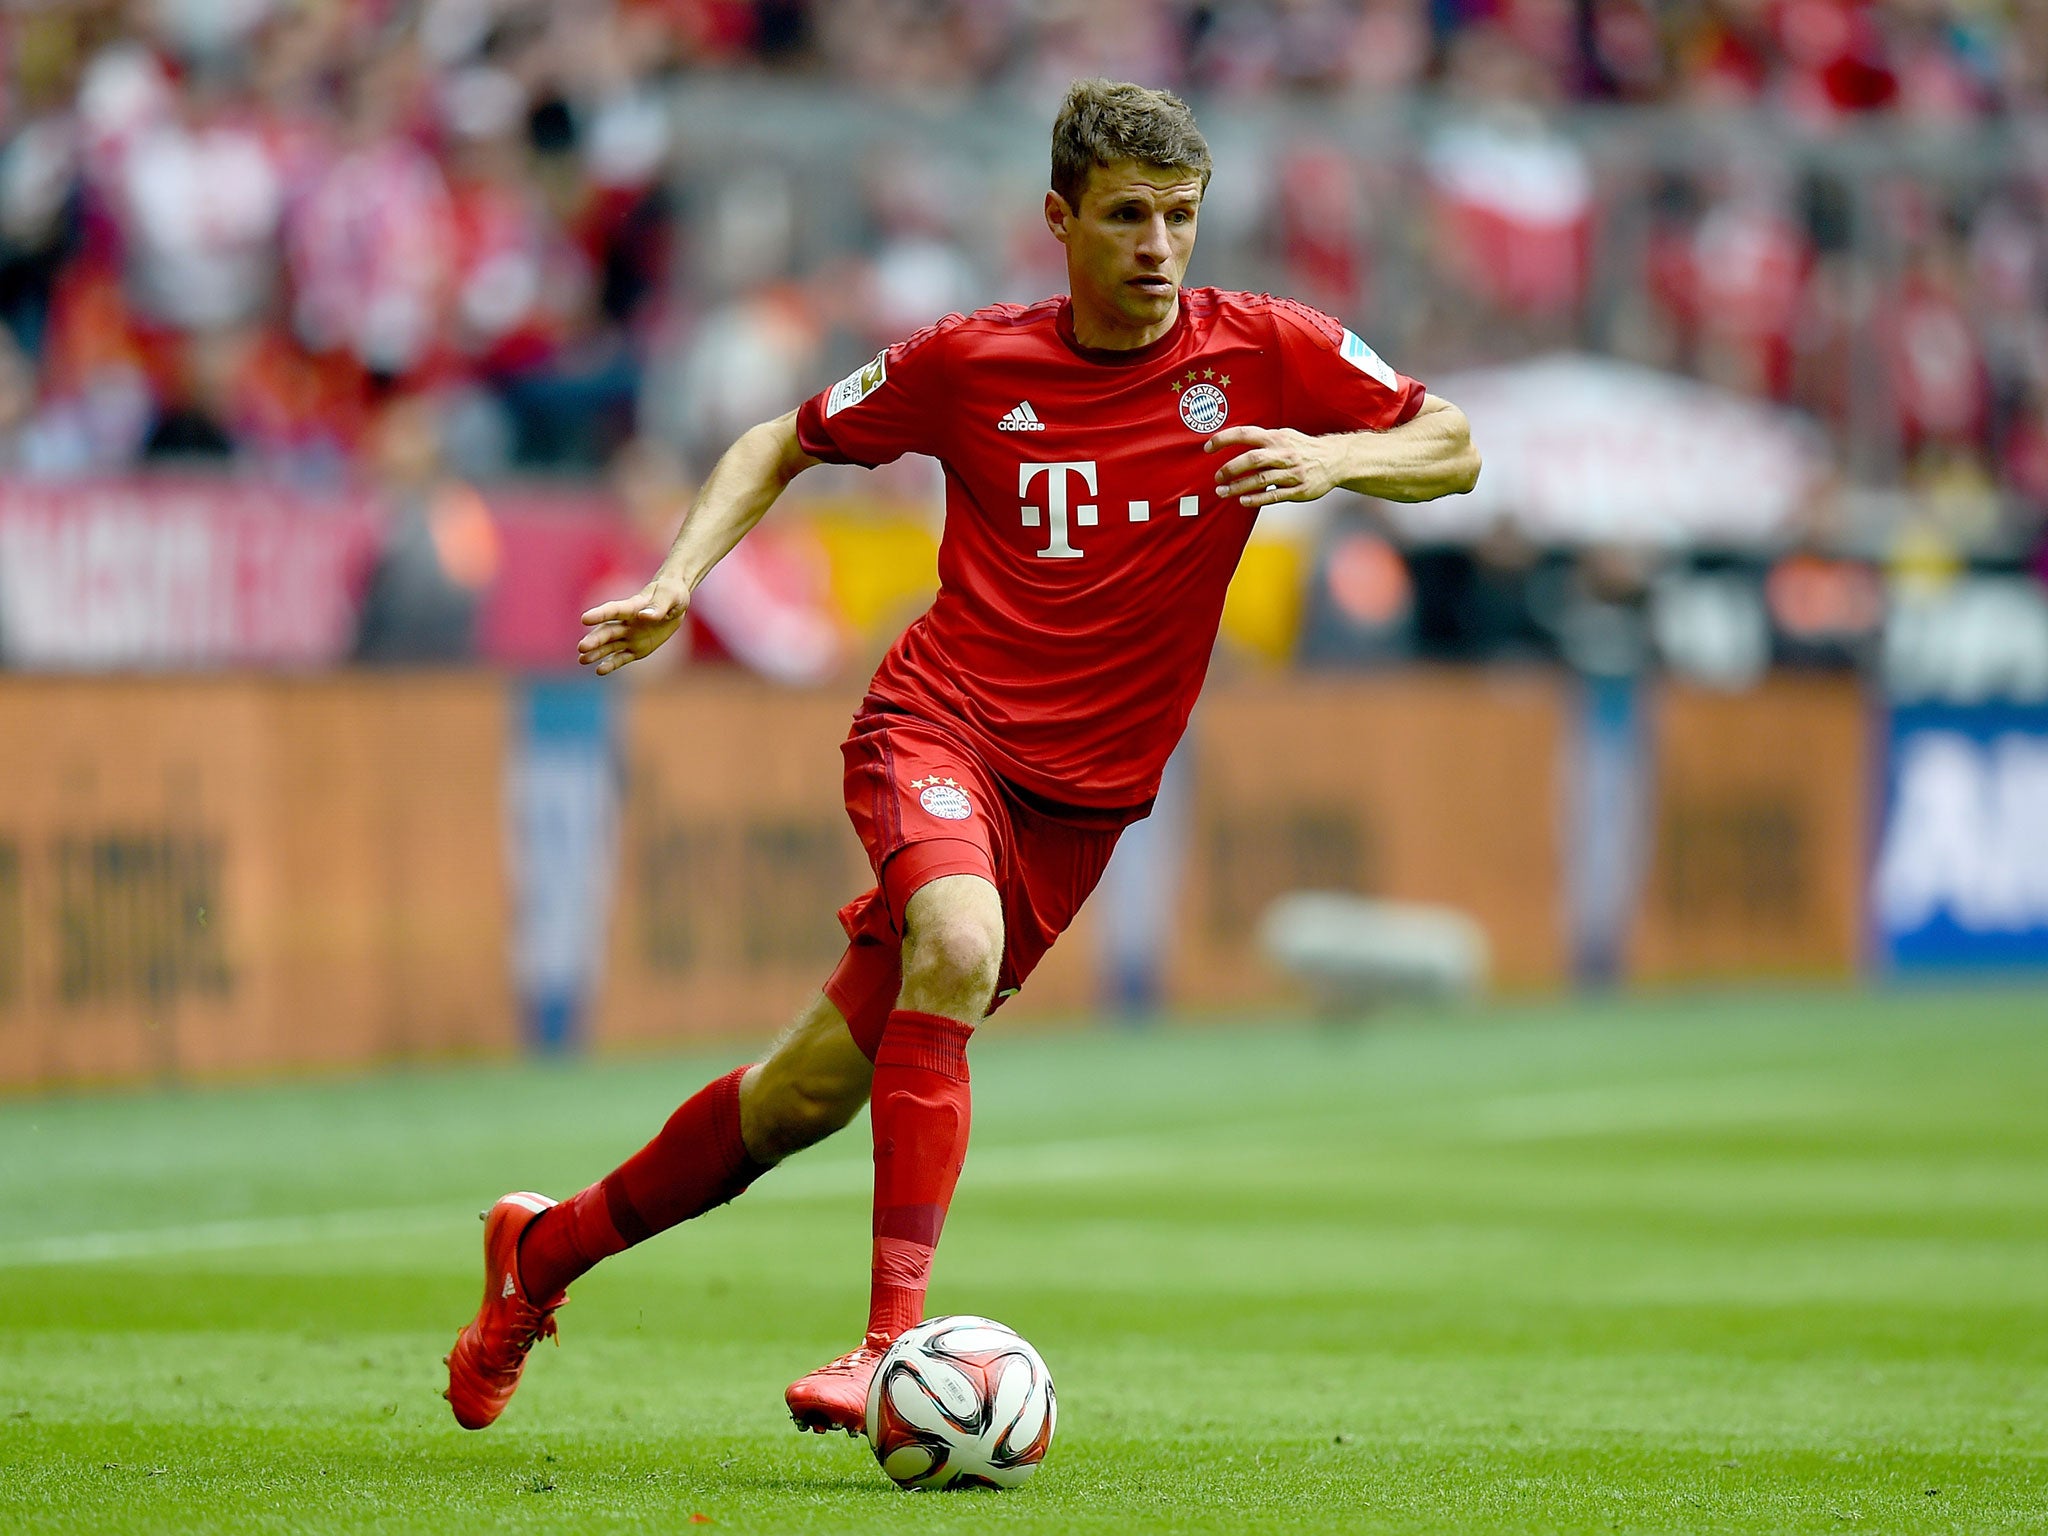 Thomas Muller in action for Bayern Munich